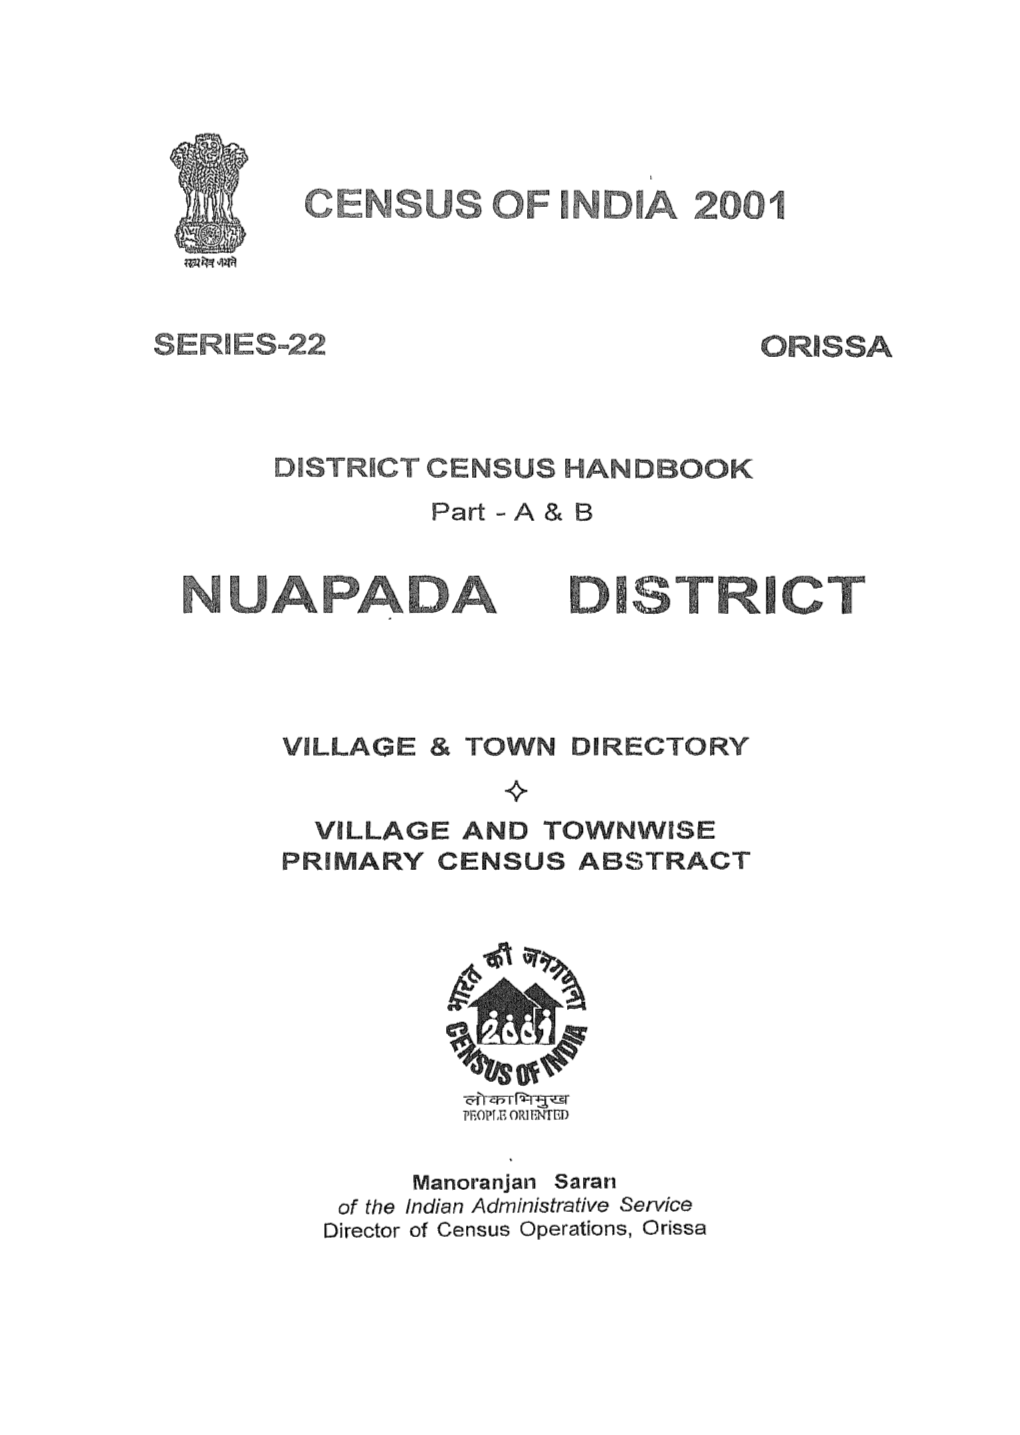 Village and Townwise Primary Census Abstract, Nuapada, Part